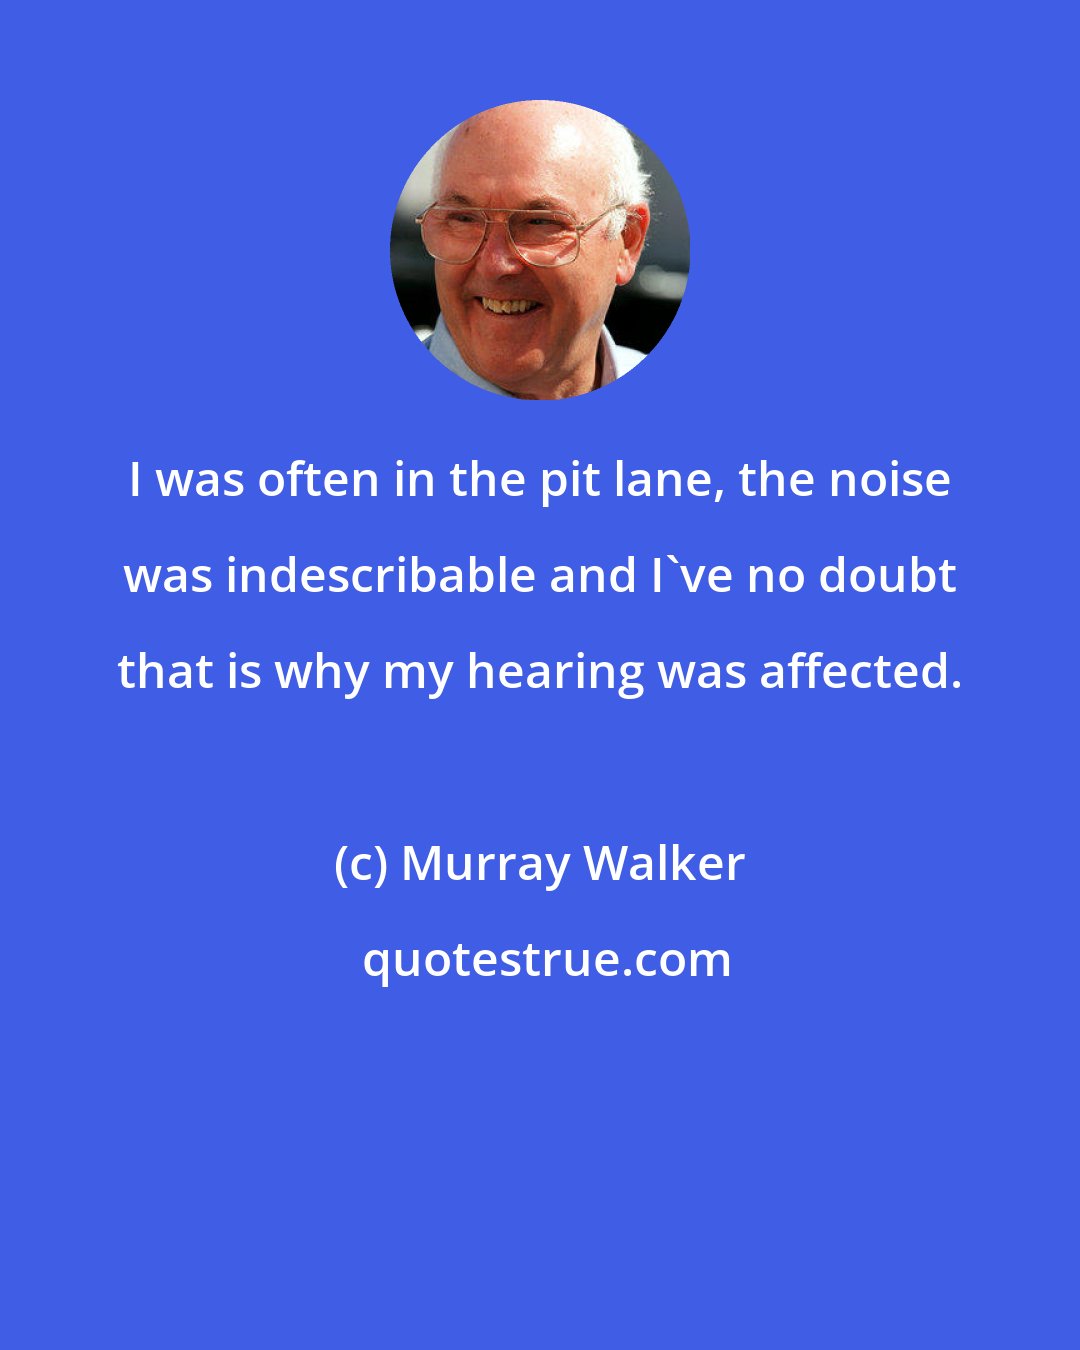 Murray Walker: I was often in the pit lane, the noise was indescribable and I've no doubt that is why my hearing was affected.